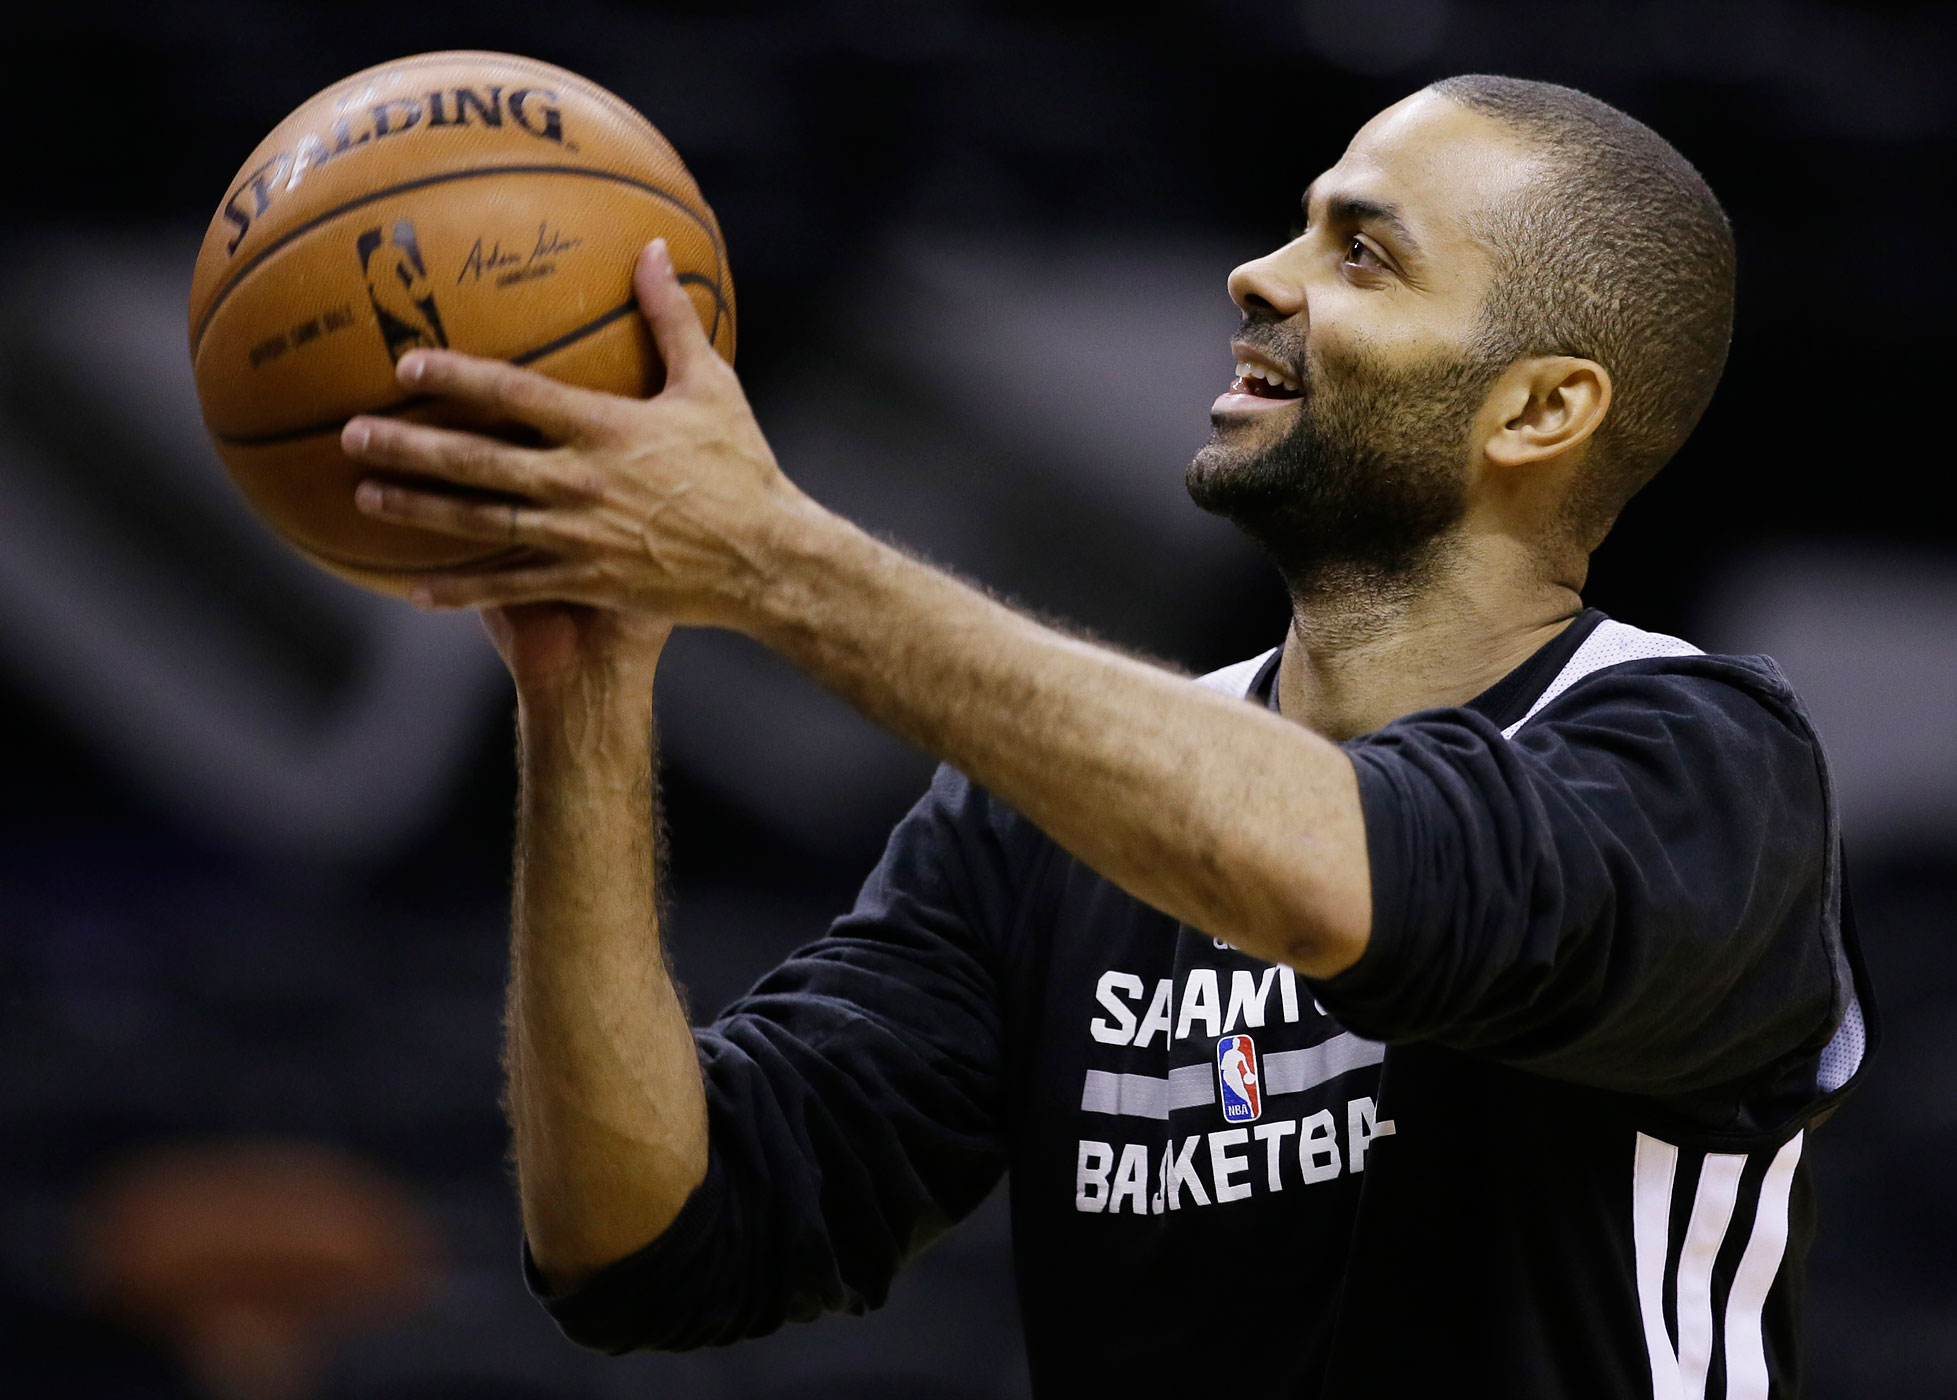 San Antonio Spurs guard Tony Parker is one of a record number of international players as the NBA season opens (Tony Gutierrez—AP)